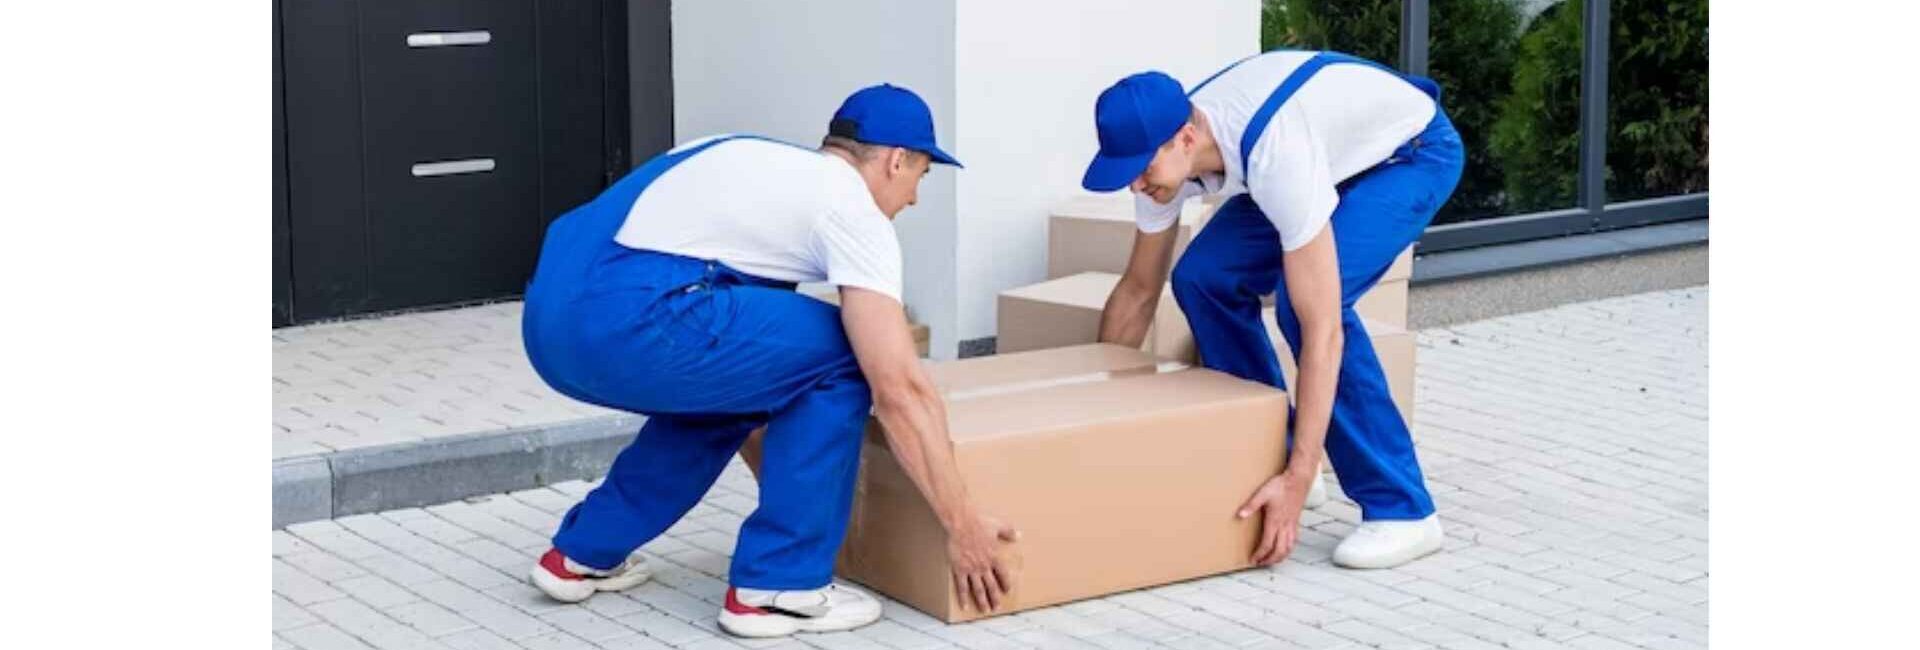 Soni Cargo Movers - Expert Packers and Movers in Noida